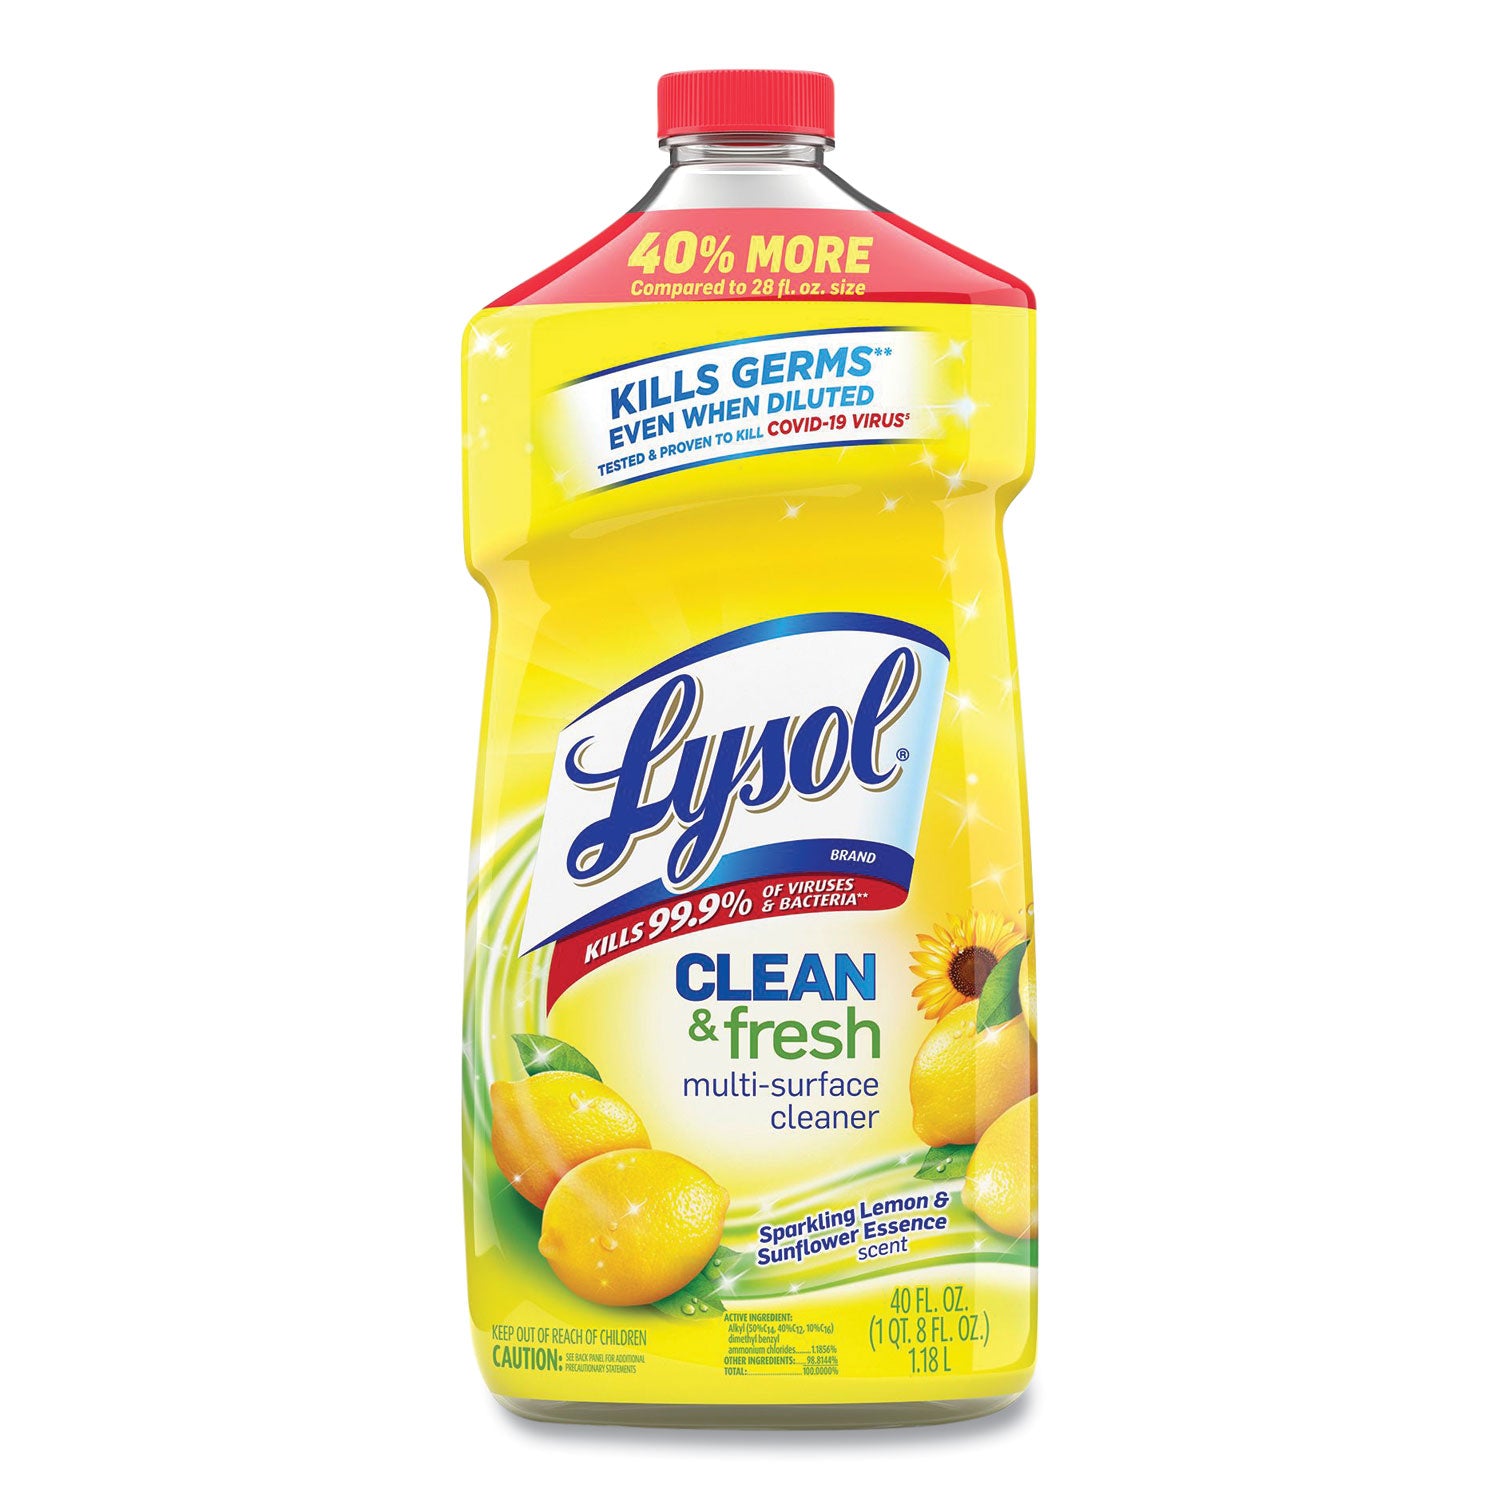 Clean and Fresh Multi-Surface Cleaner, Sparkling Lemon and Sunflower Essence Scent, 40 oz Bottle - 